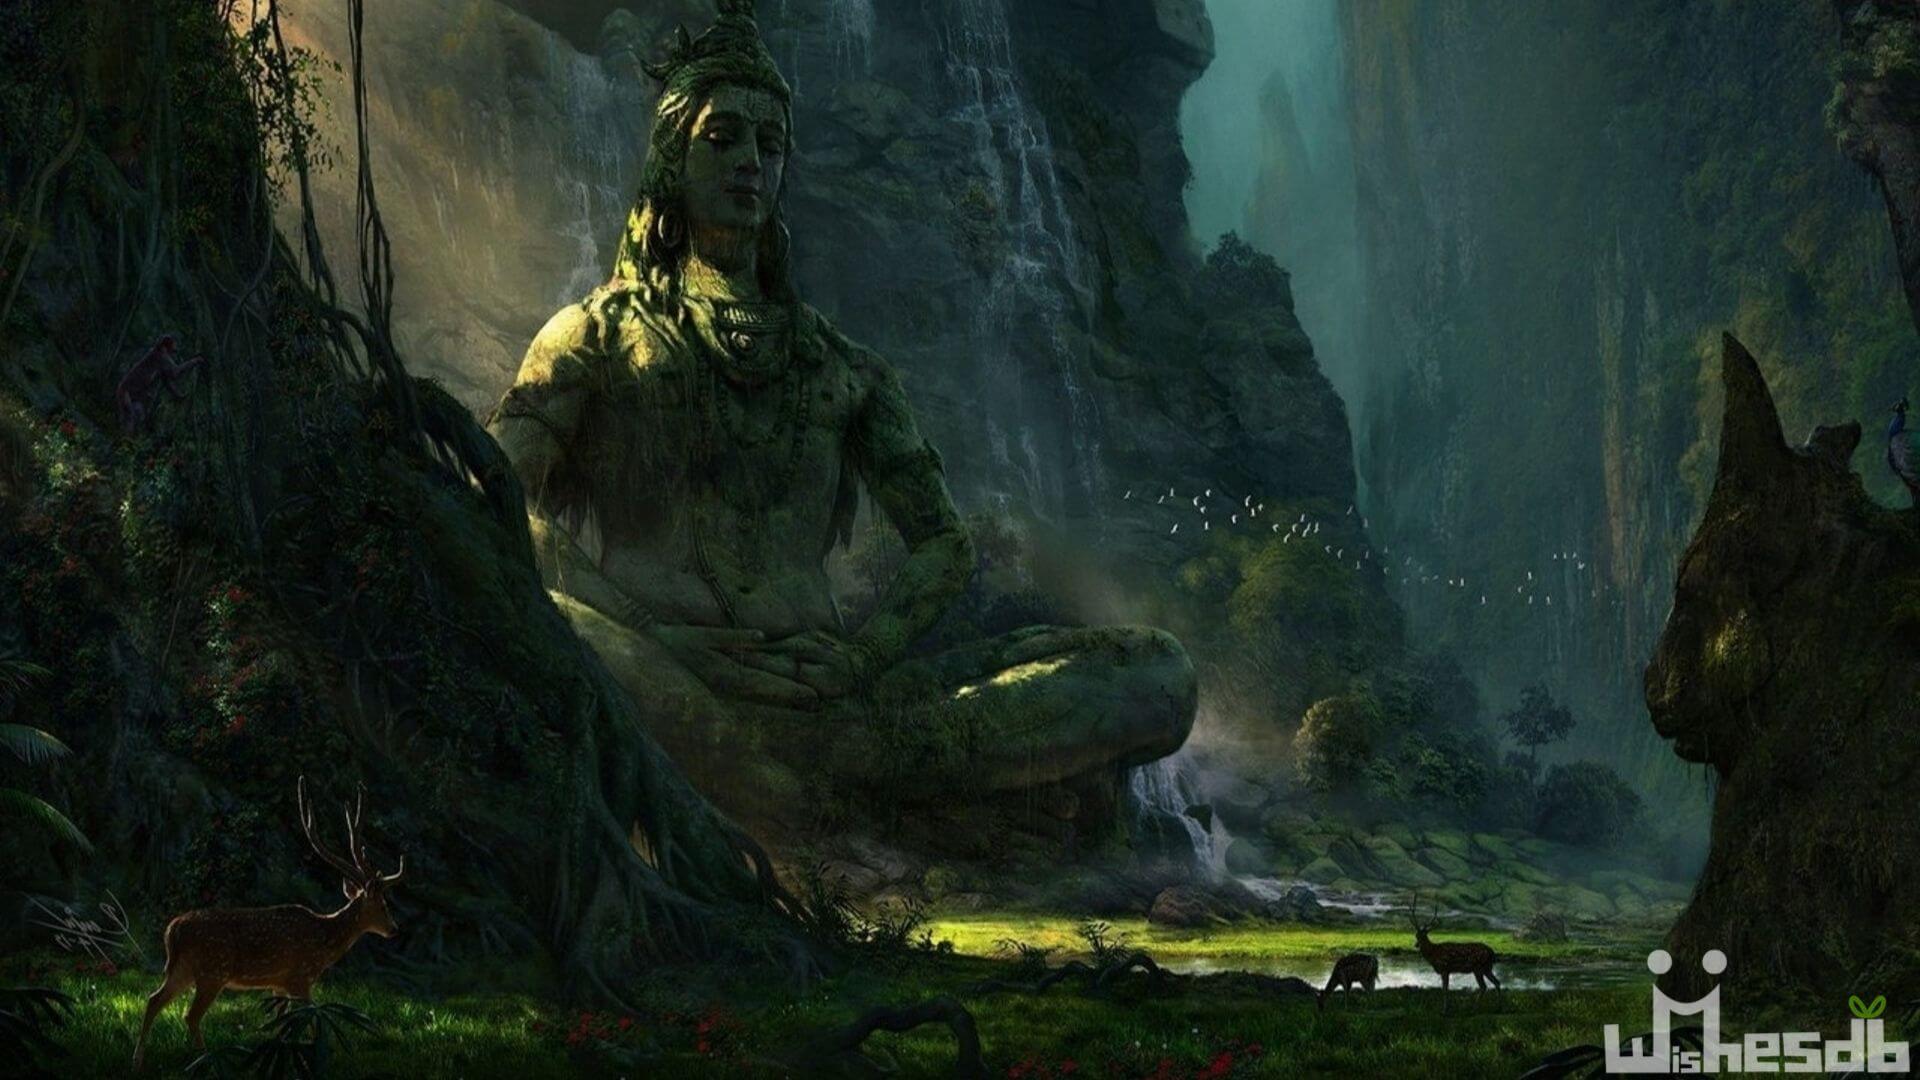 Lord Shiva Family Hd Wallpapers 1920x1080 Download For Mobile : God